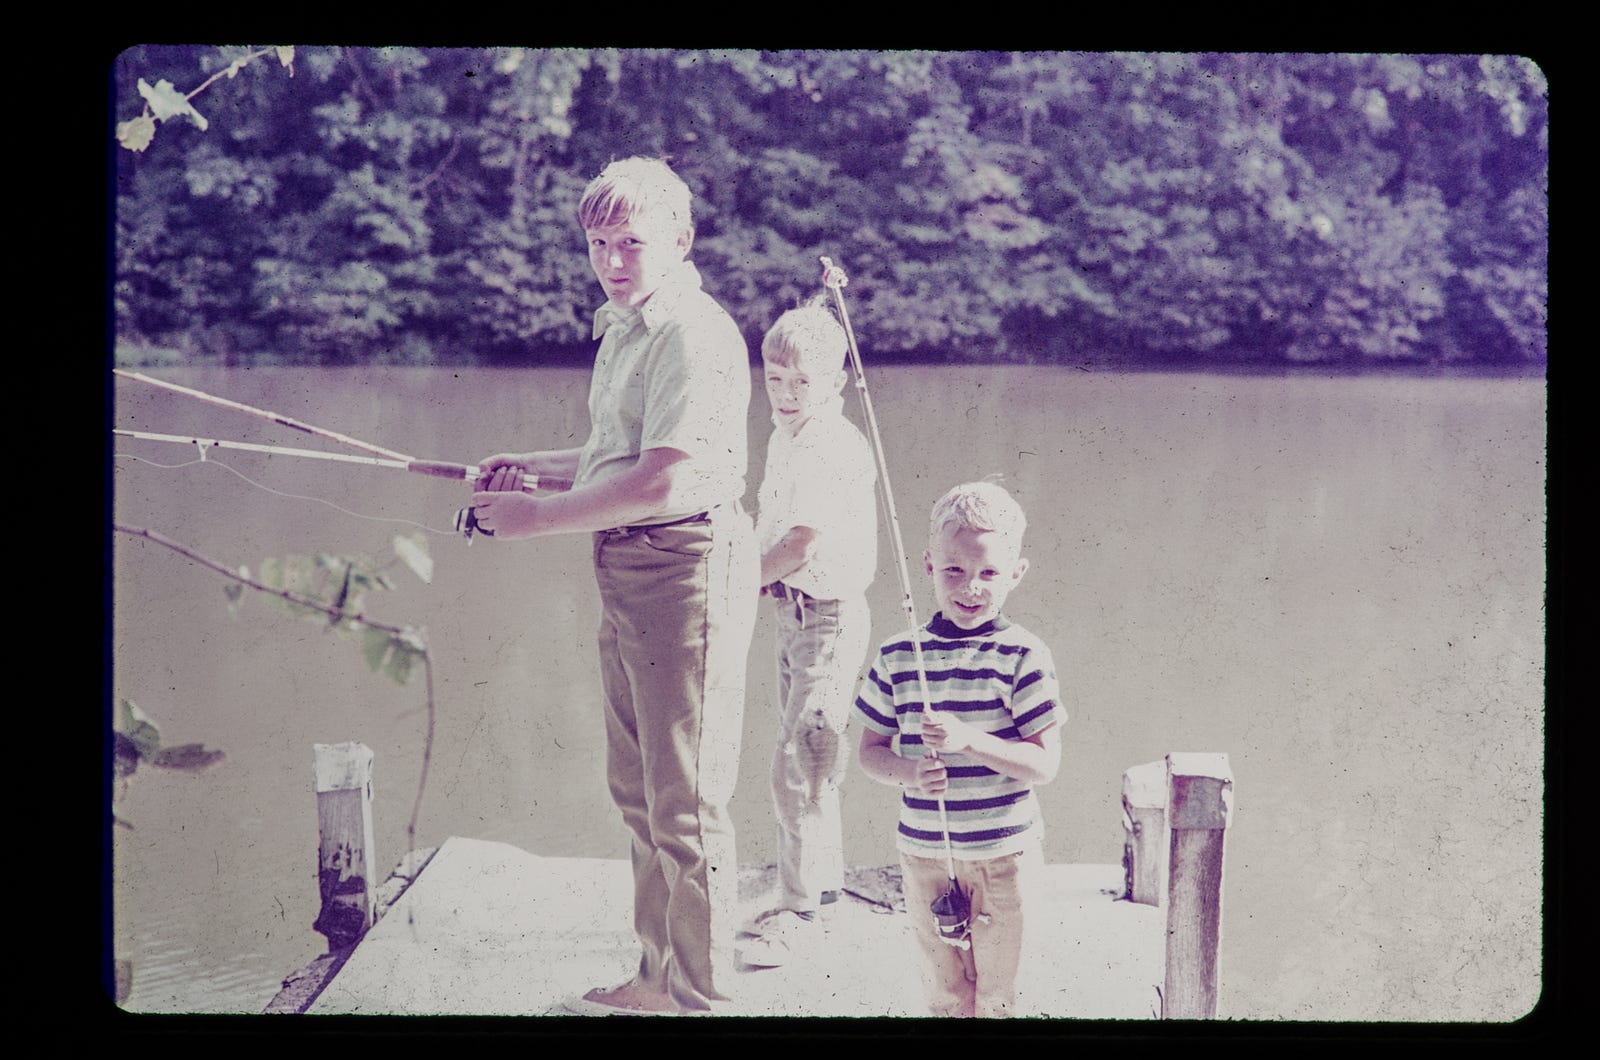 Photo of Ron Steed and his brothers Kevin and David, fishing.